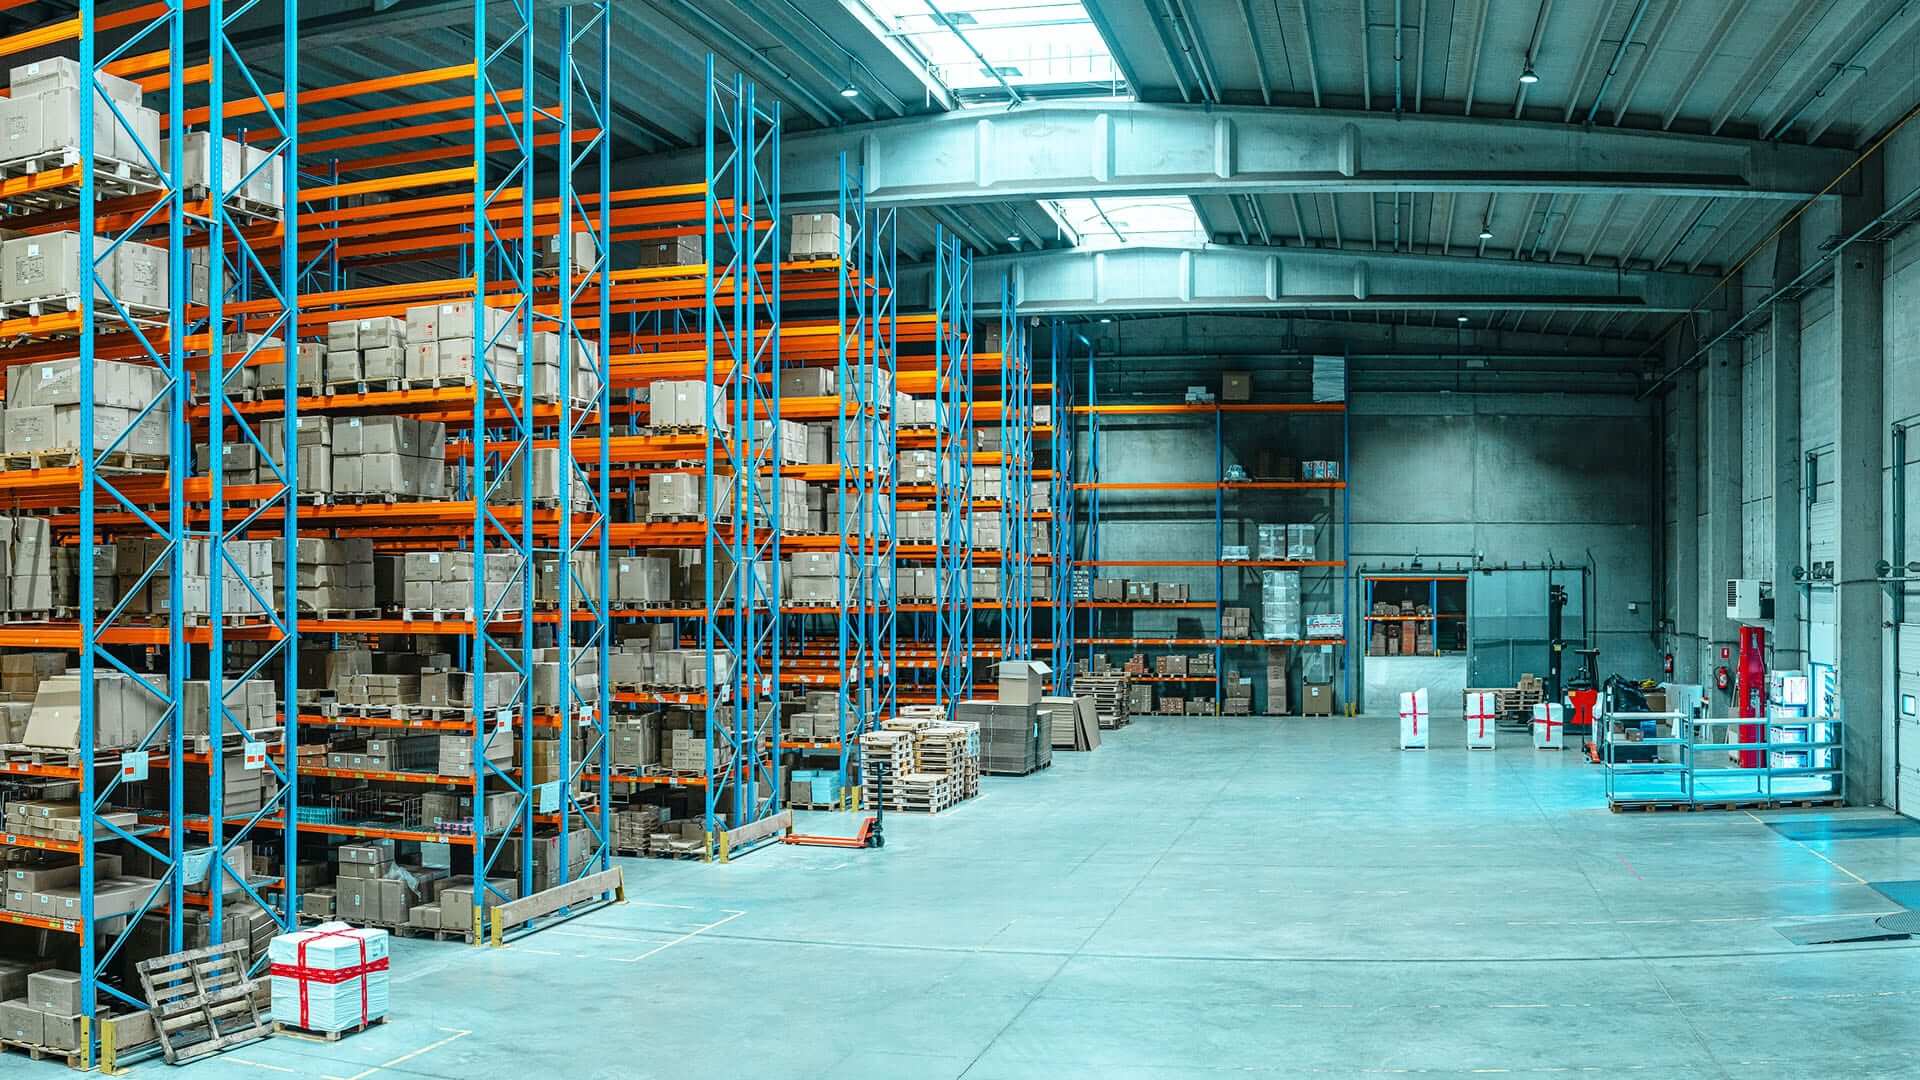 Automation is key in massive warehouses like this